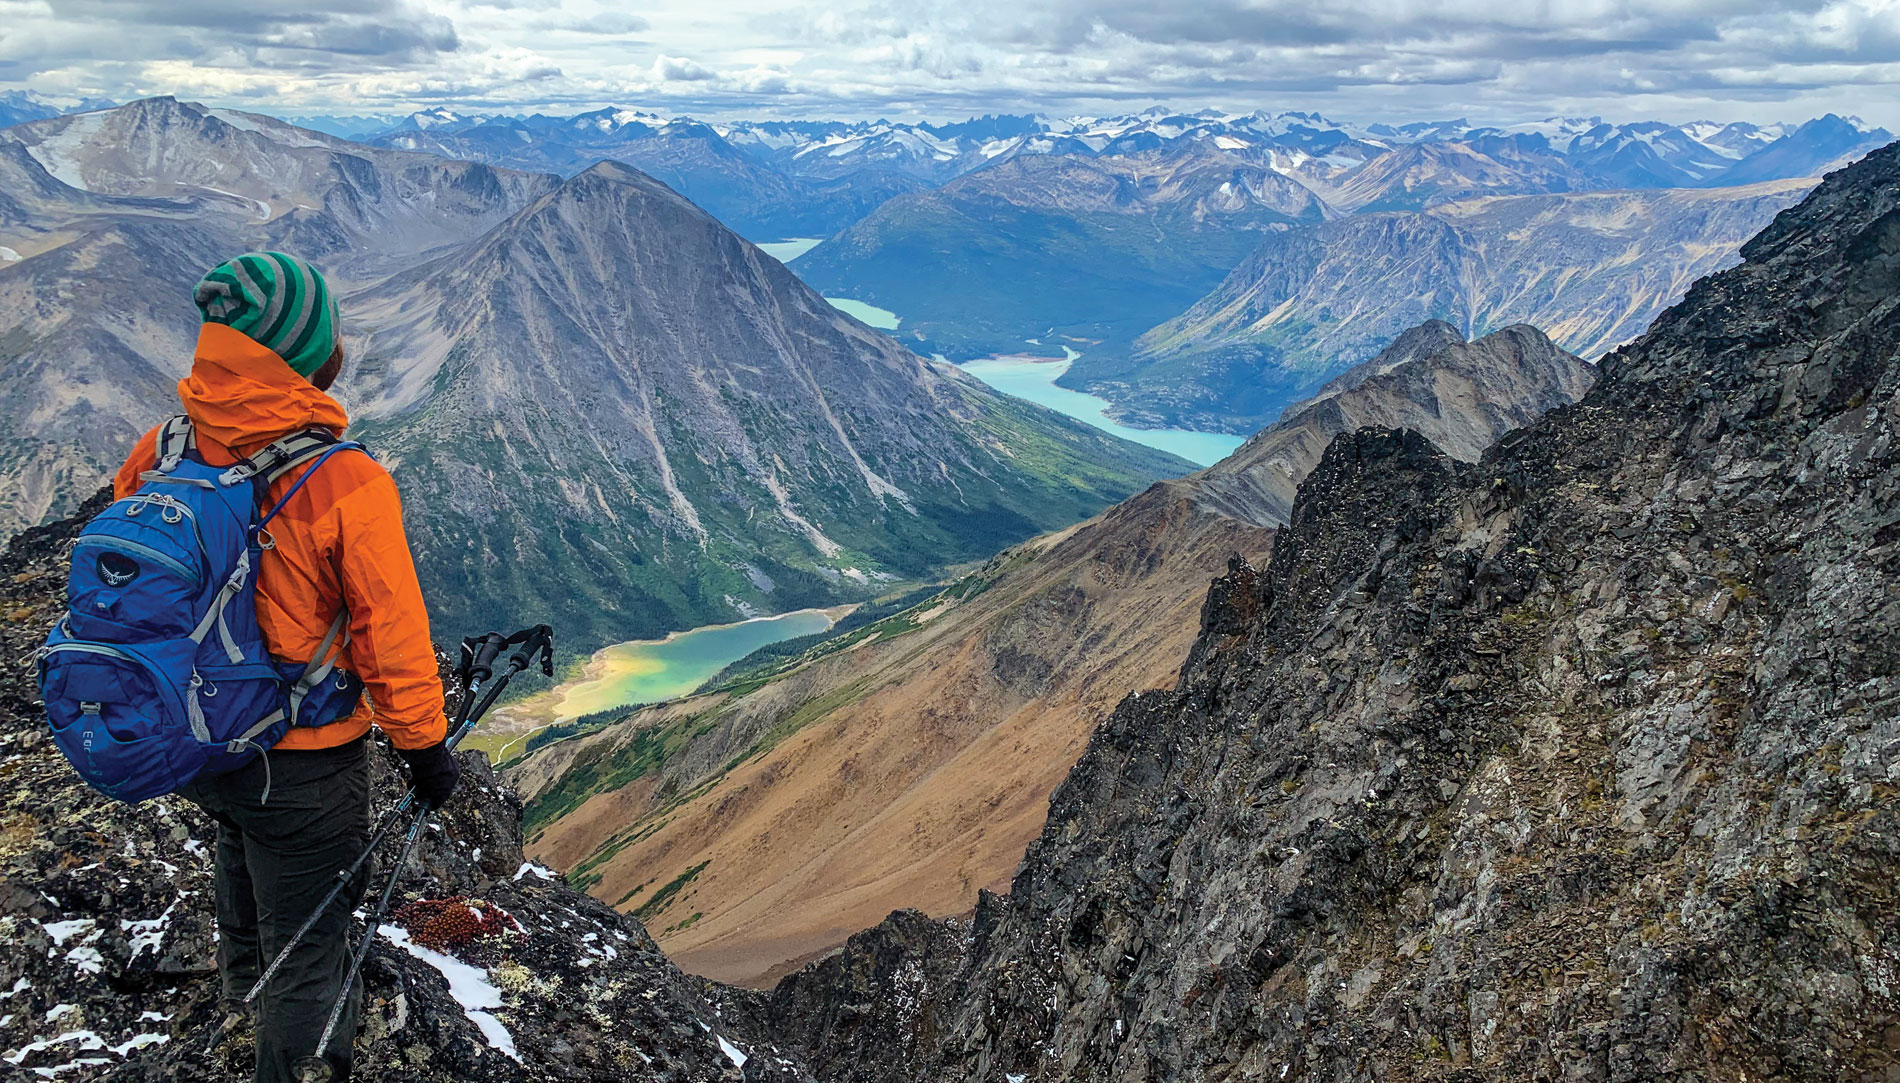 A Chilkoot Trail hiker takes in the mountains